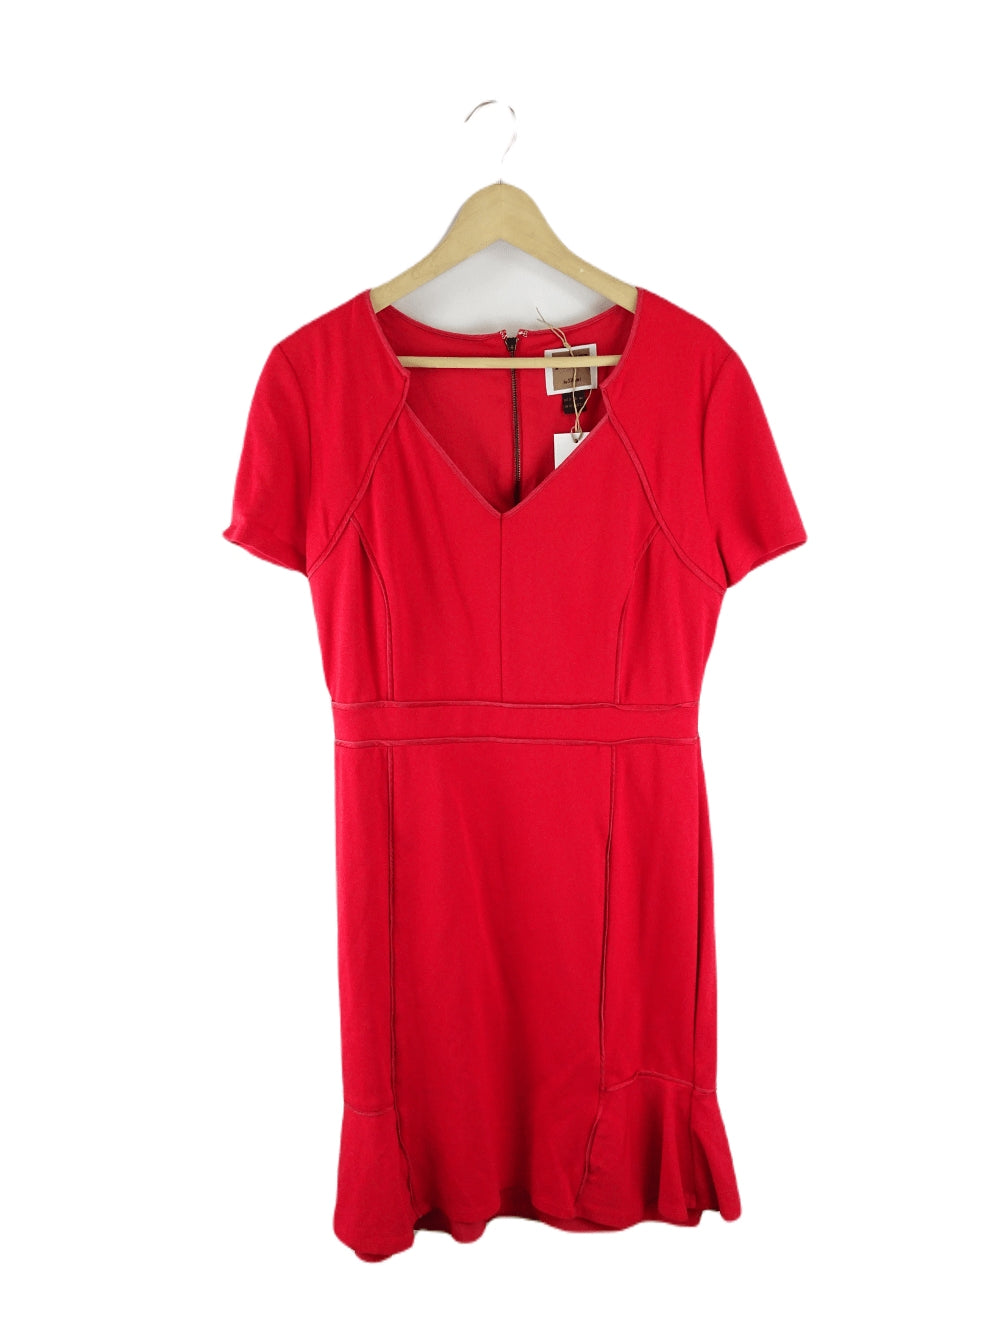 Nue by Shani Red Dress 16